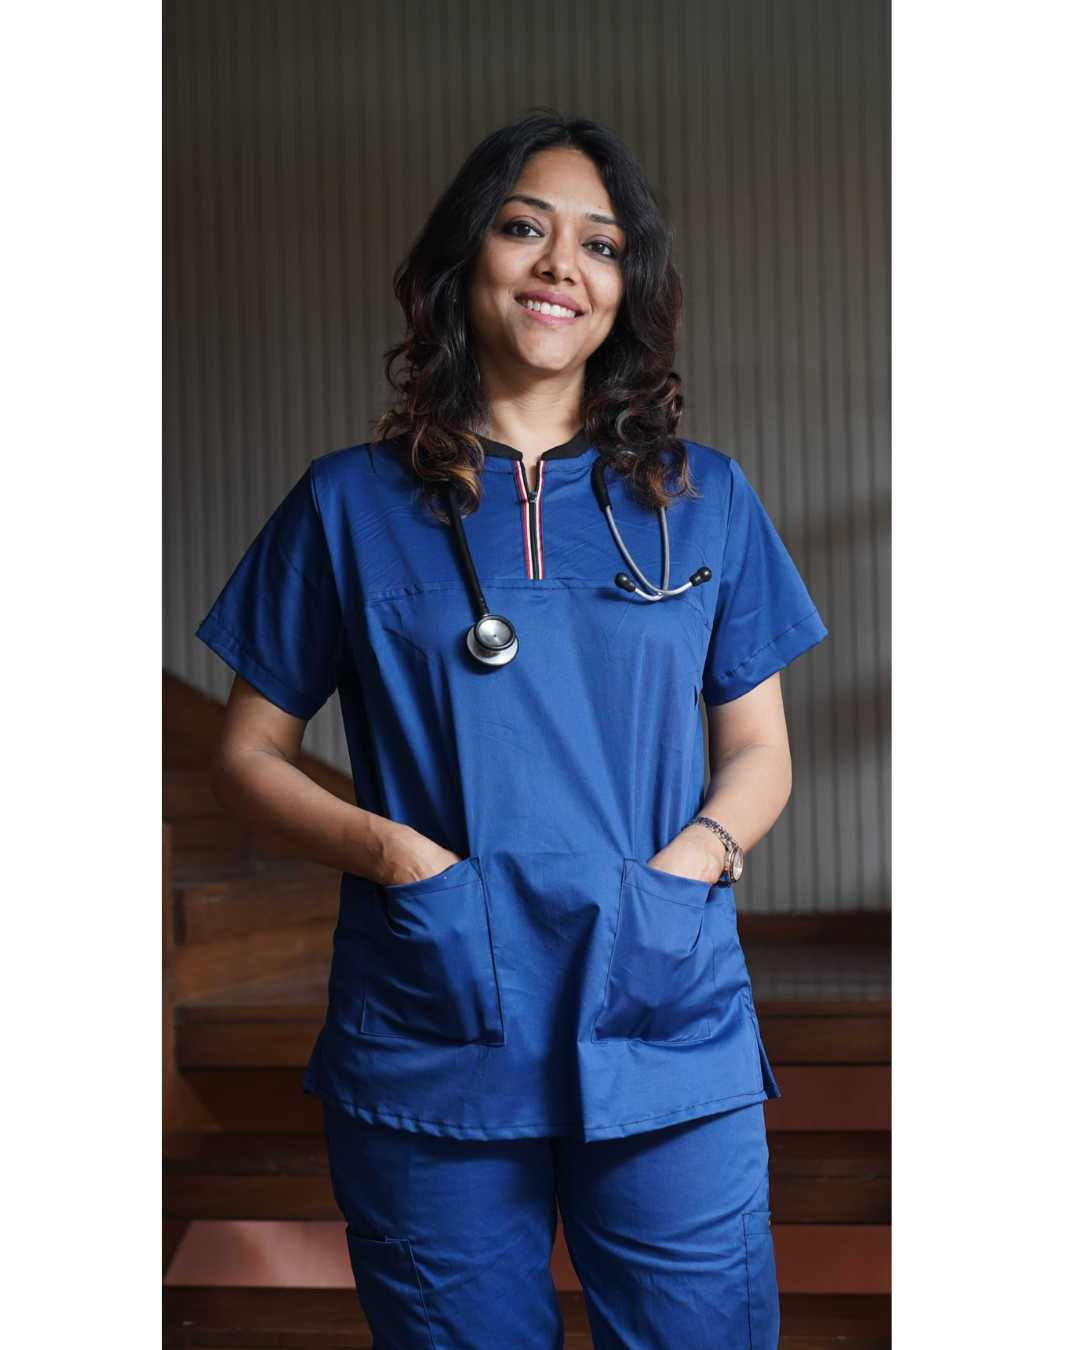 Women's Stretchable Scrub Suit - Medical Blue